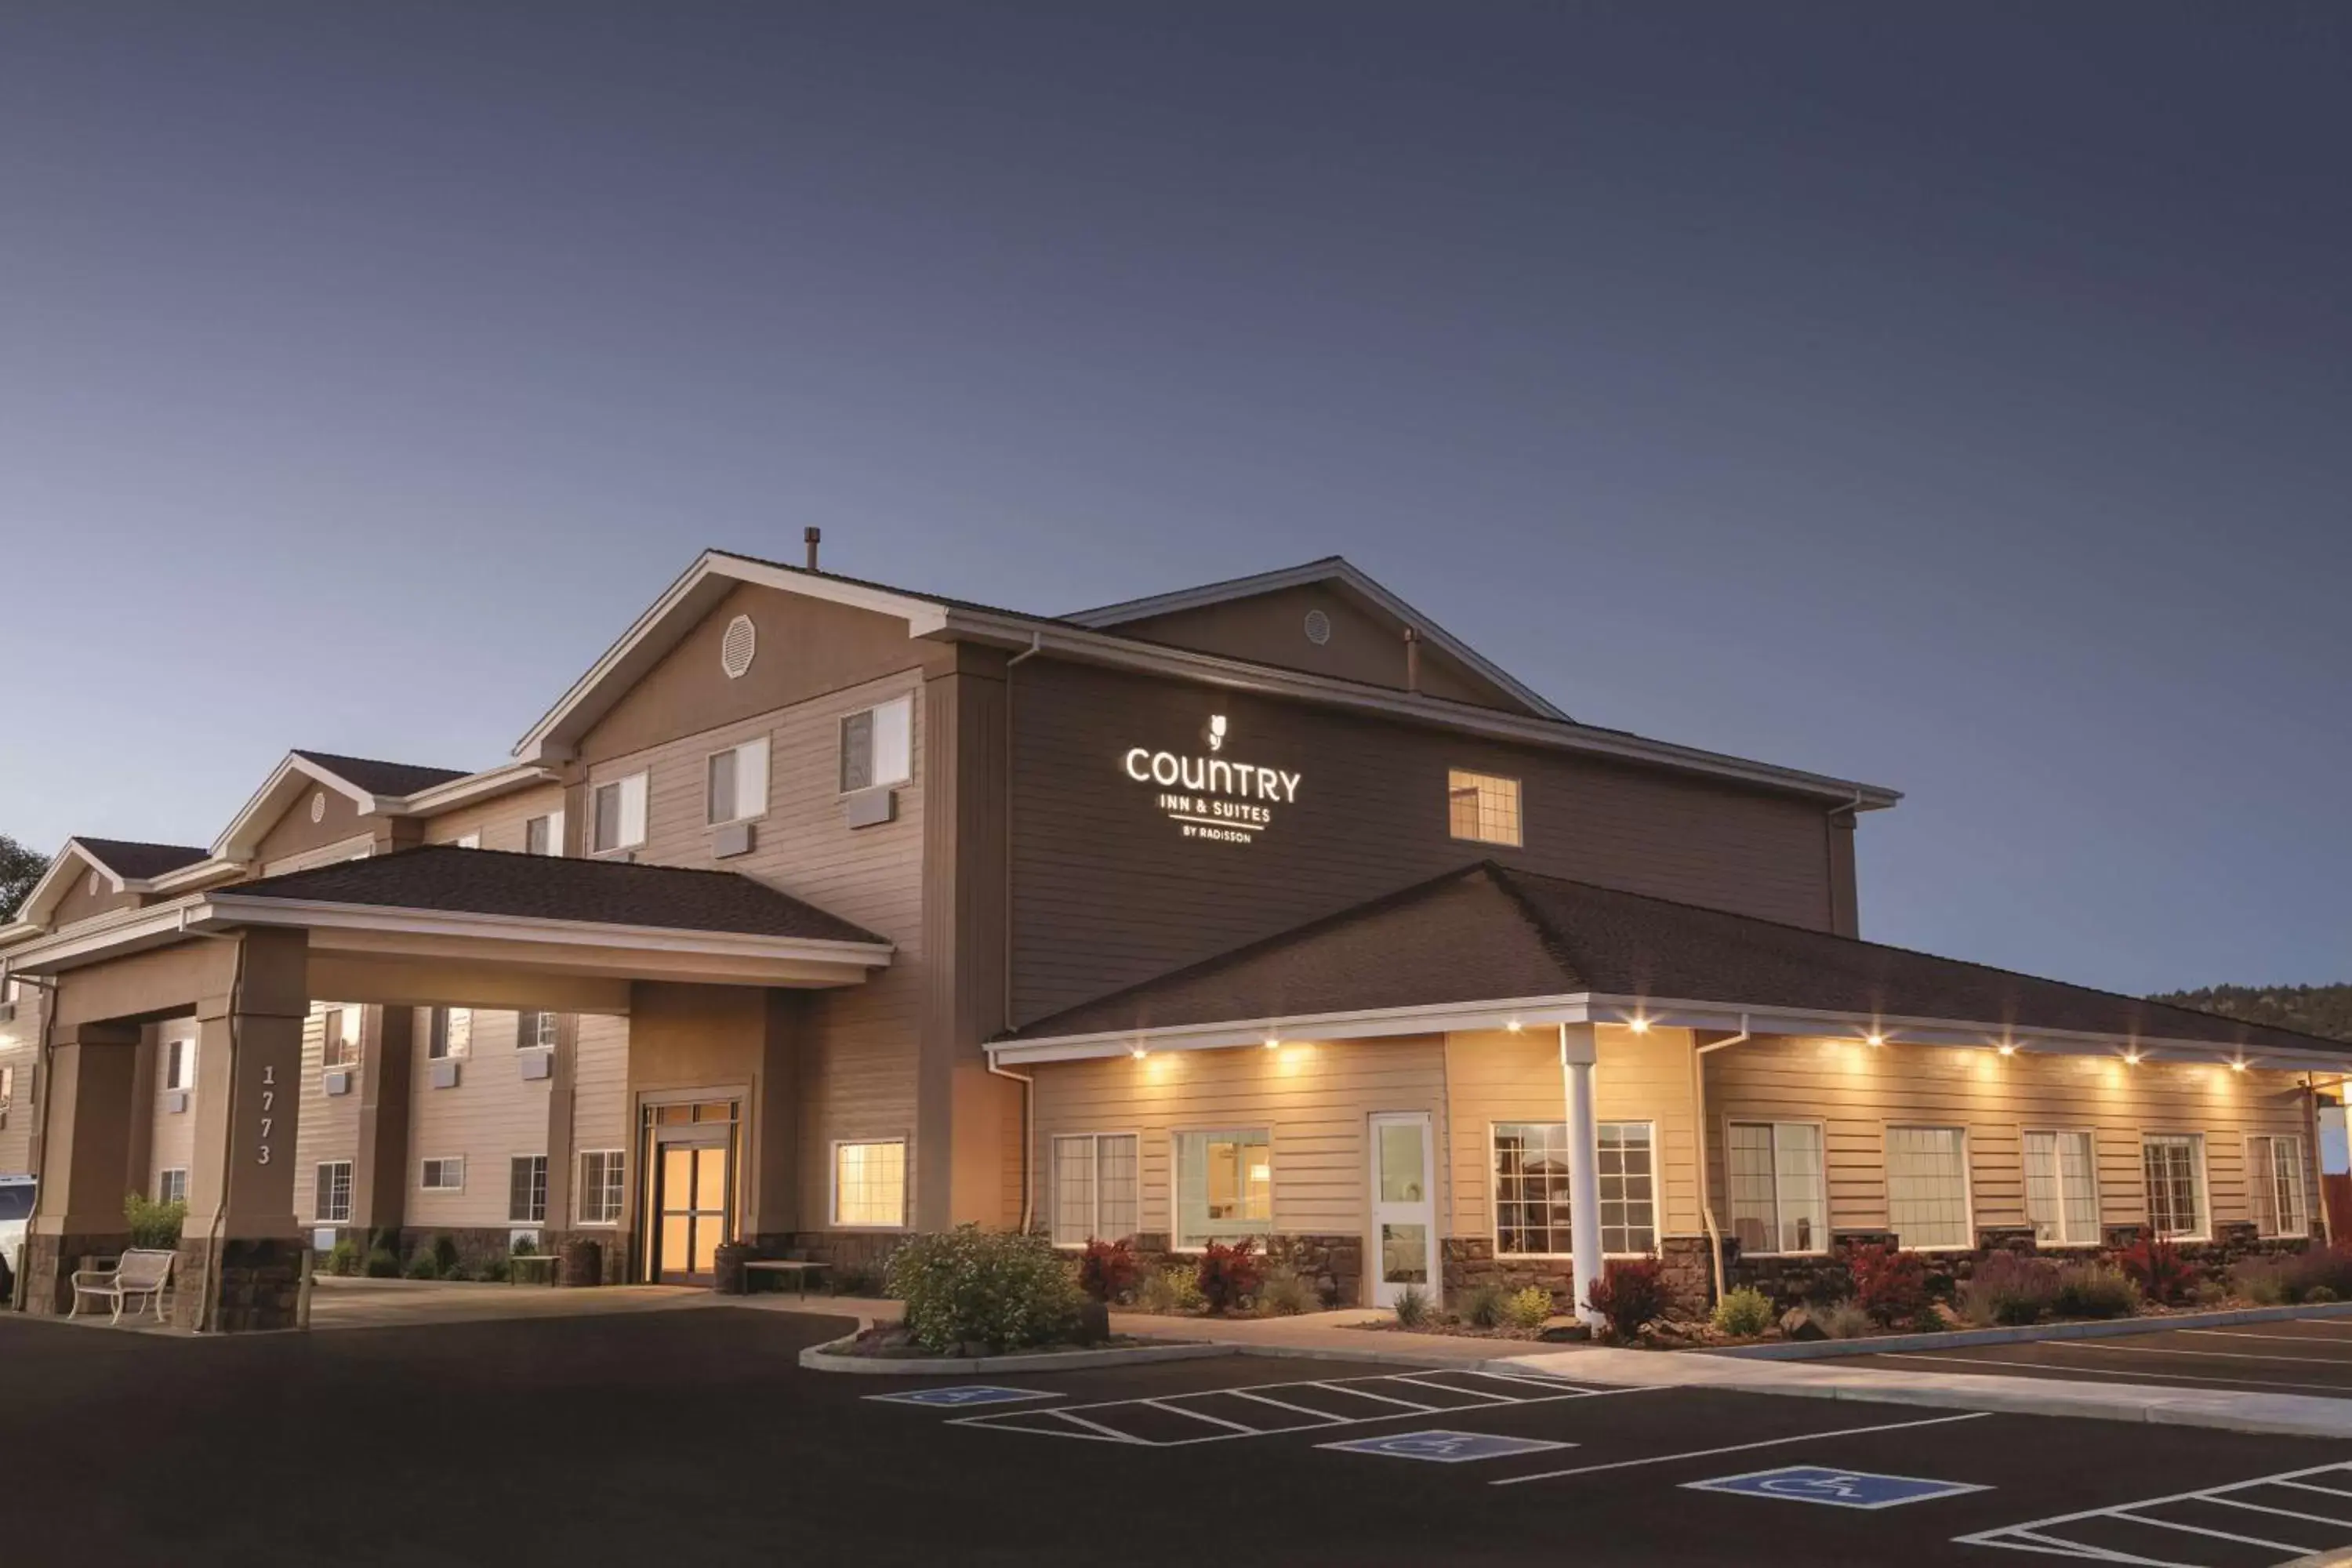 Property Building in Country Inn & Suites by Radisson, Prineville, OR